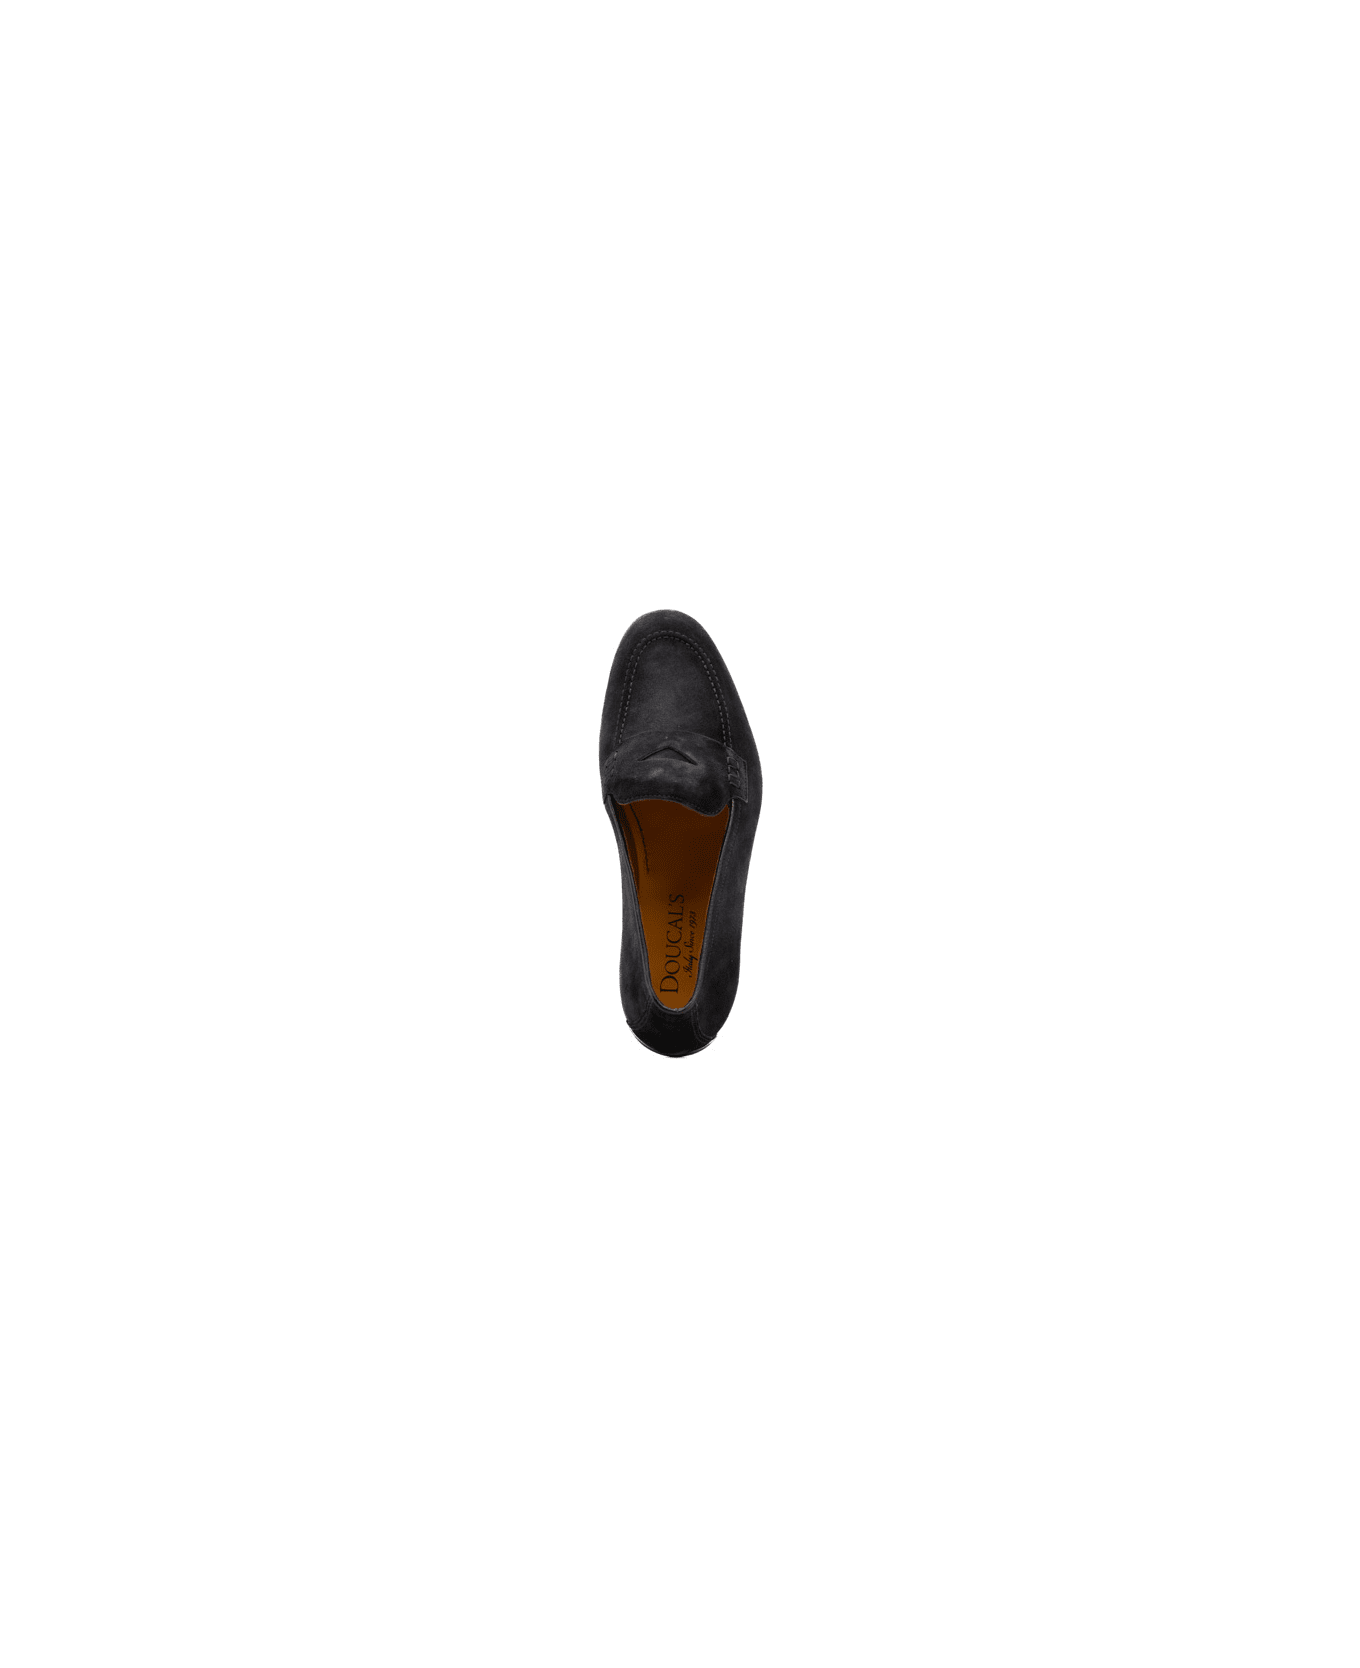 Doucal's Penny Suede Moccasin - Notte+f.do nero